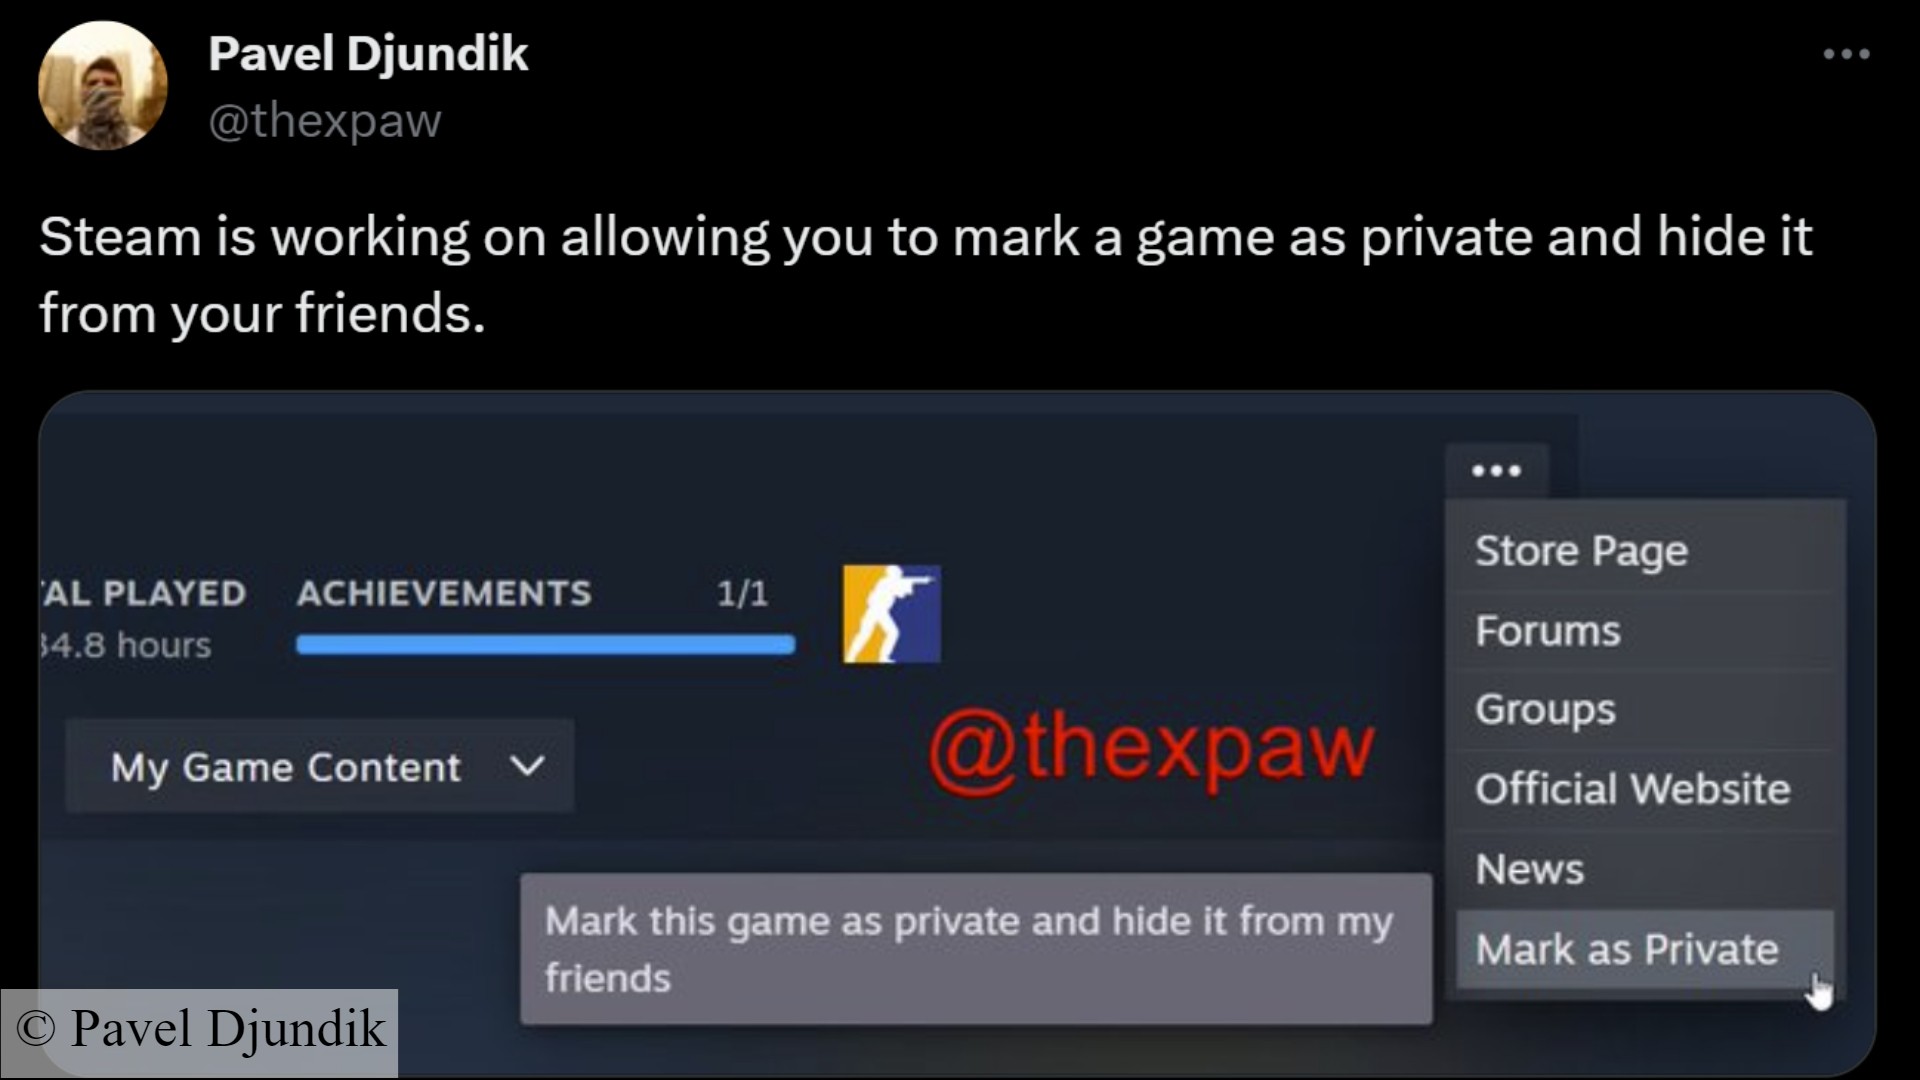 Steam update hide games: A supposed new Steam feature from Valve that lets players hide games from friends